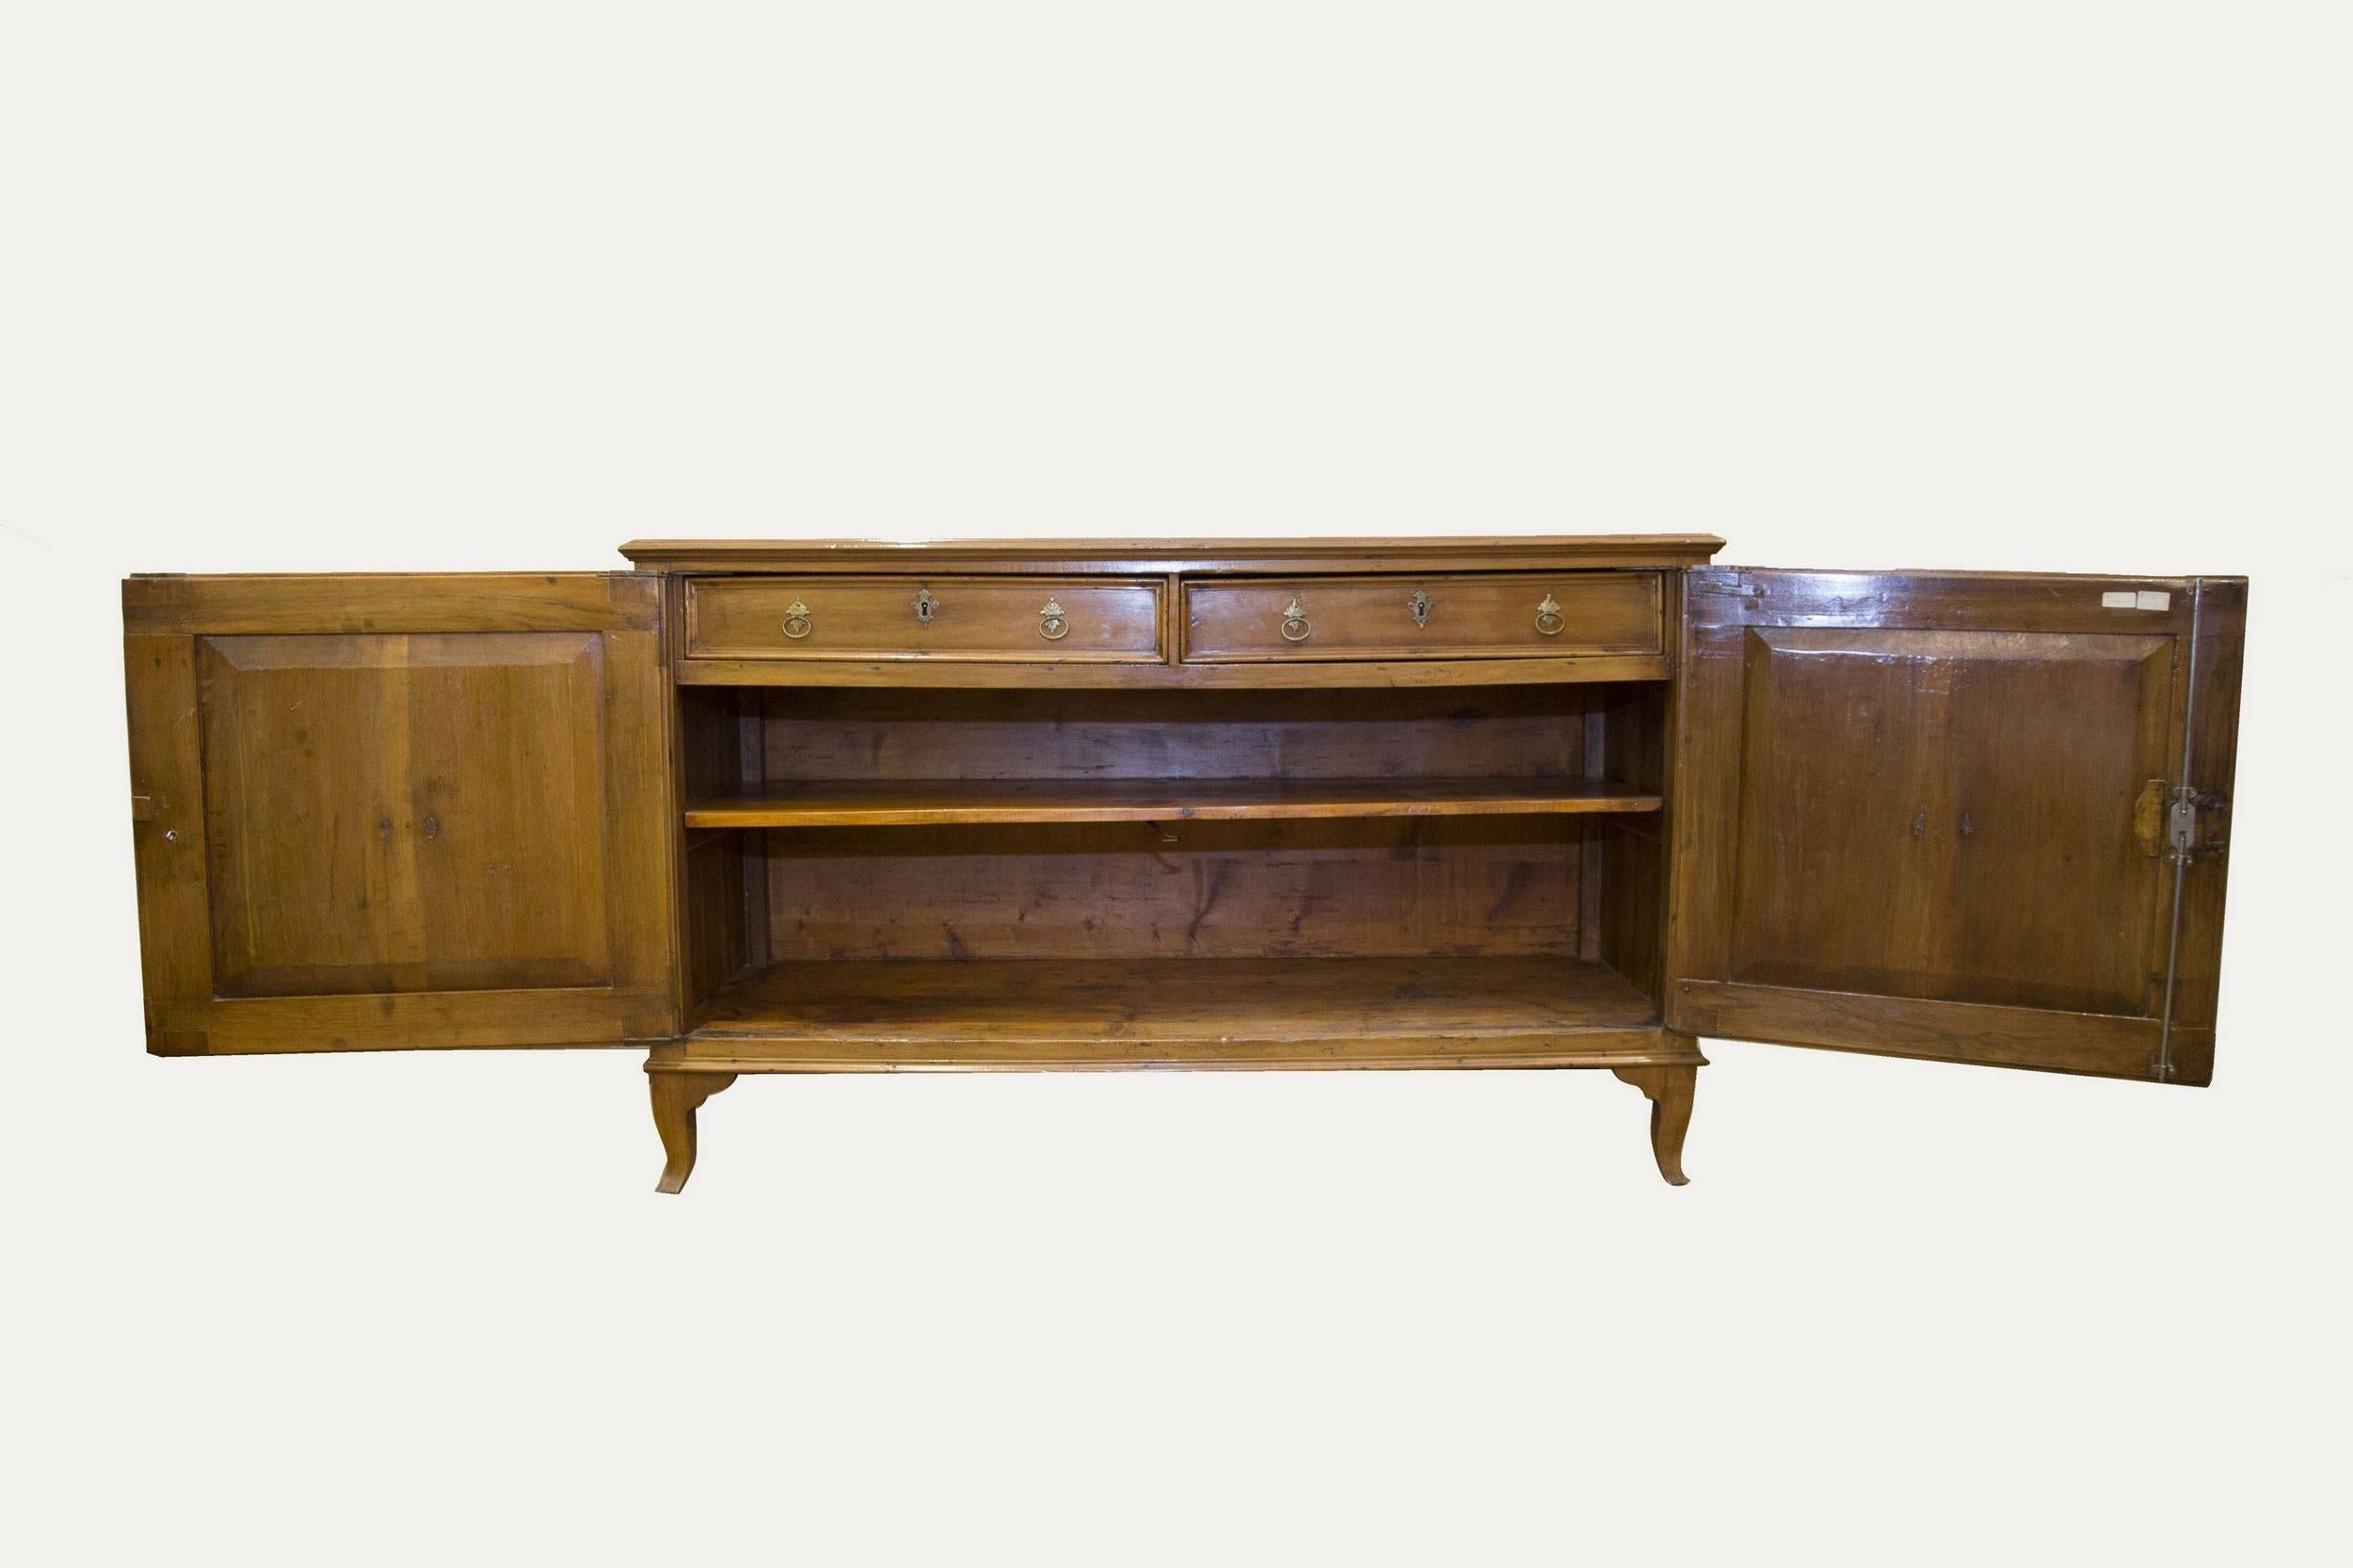 Fine Italian credenza, Veneto, last quarter of the eighteenth century, cherrywood. Arched feet. Inside a shelf and two original drawers, one with a compartment.

PLEASE NOTE THAT THE EXPORT AUTHORIZATION BY THE ITALIAN MINISTRY OF CULTURAL HERITAGE